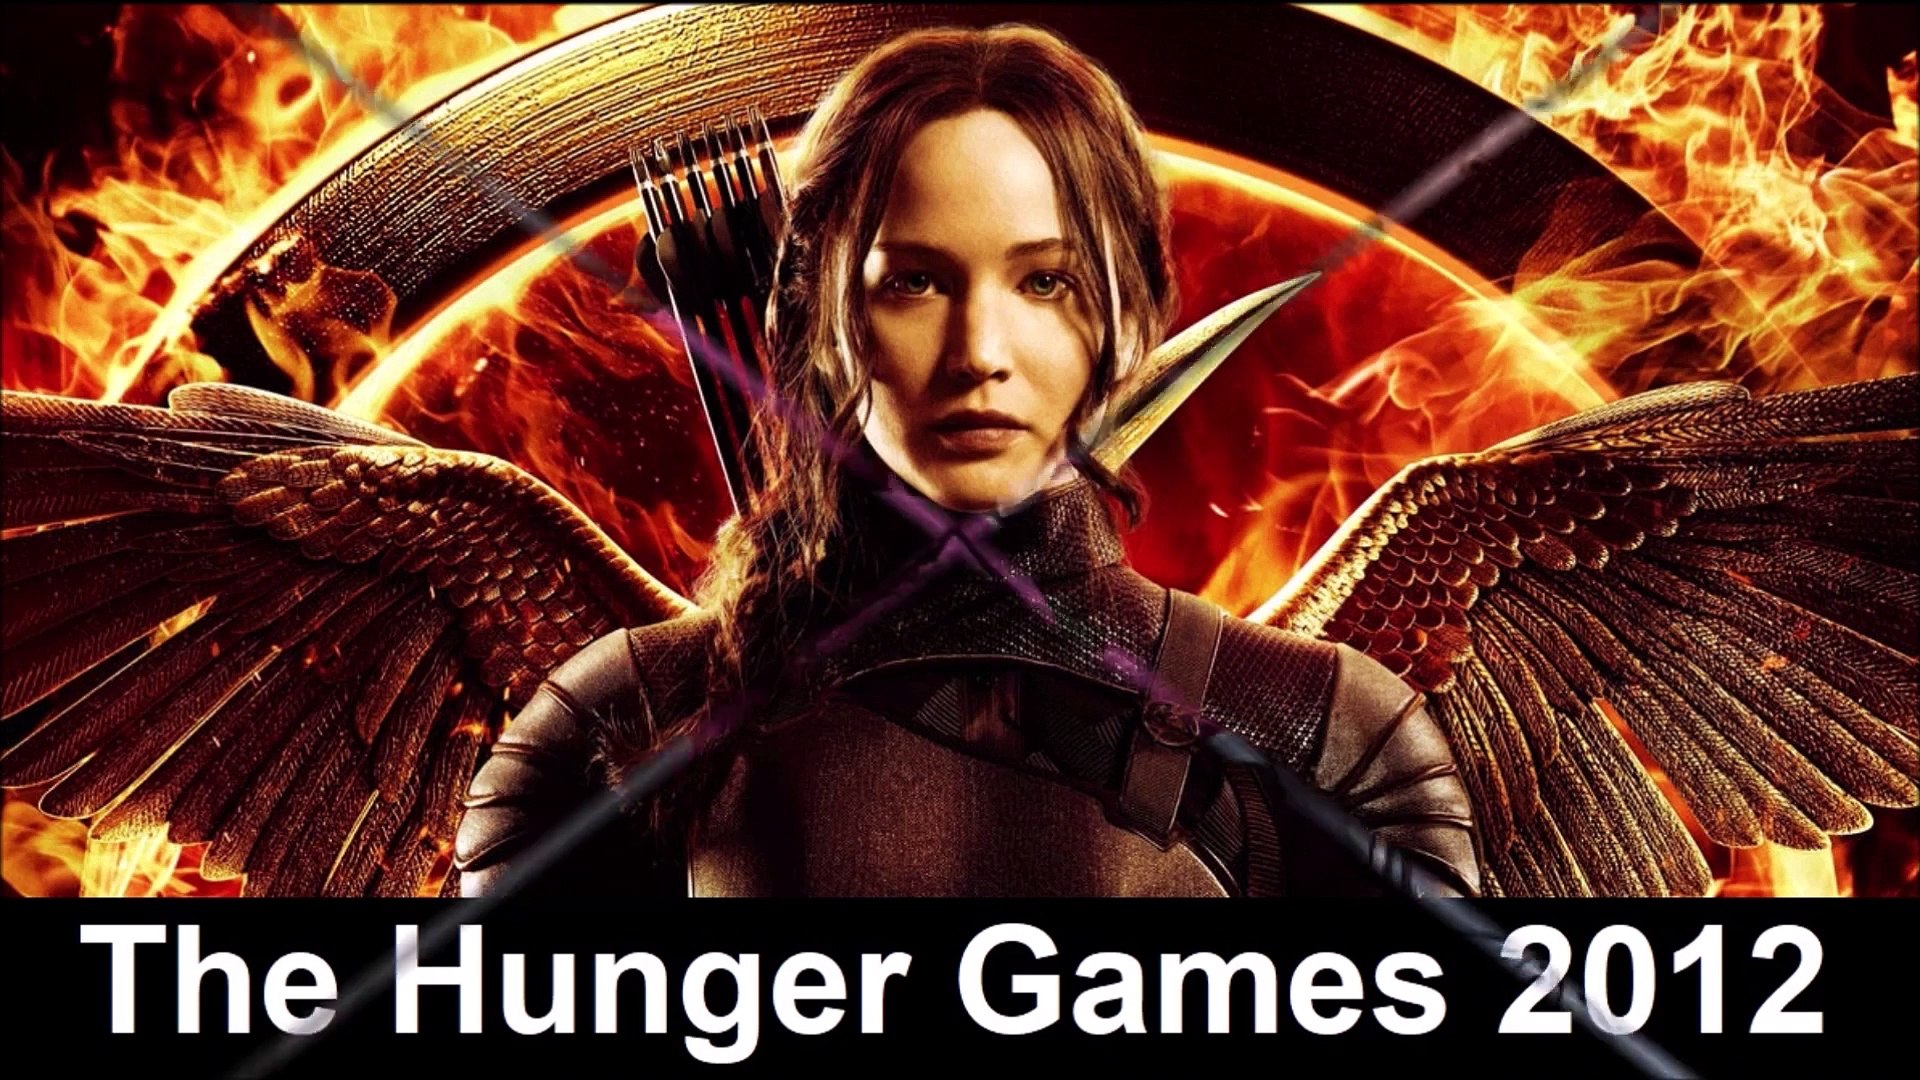 ⁣Hunger Games All 4 Best Hindi Dubbed Movies List - Franchise - Movies - Review - Explained